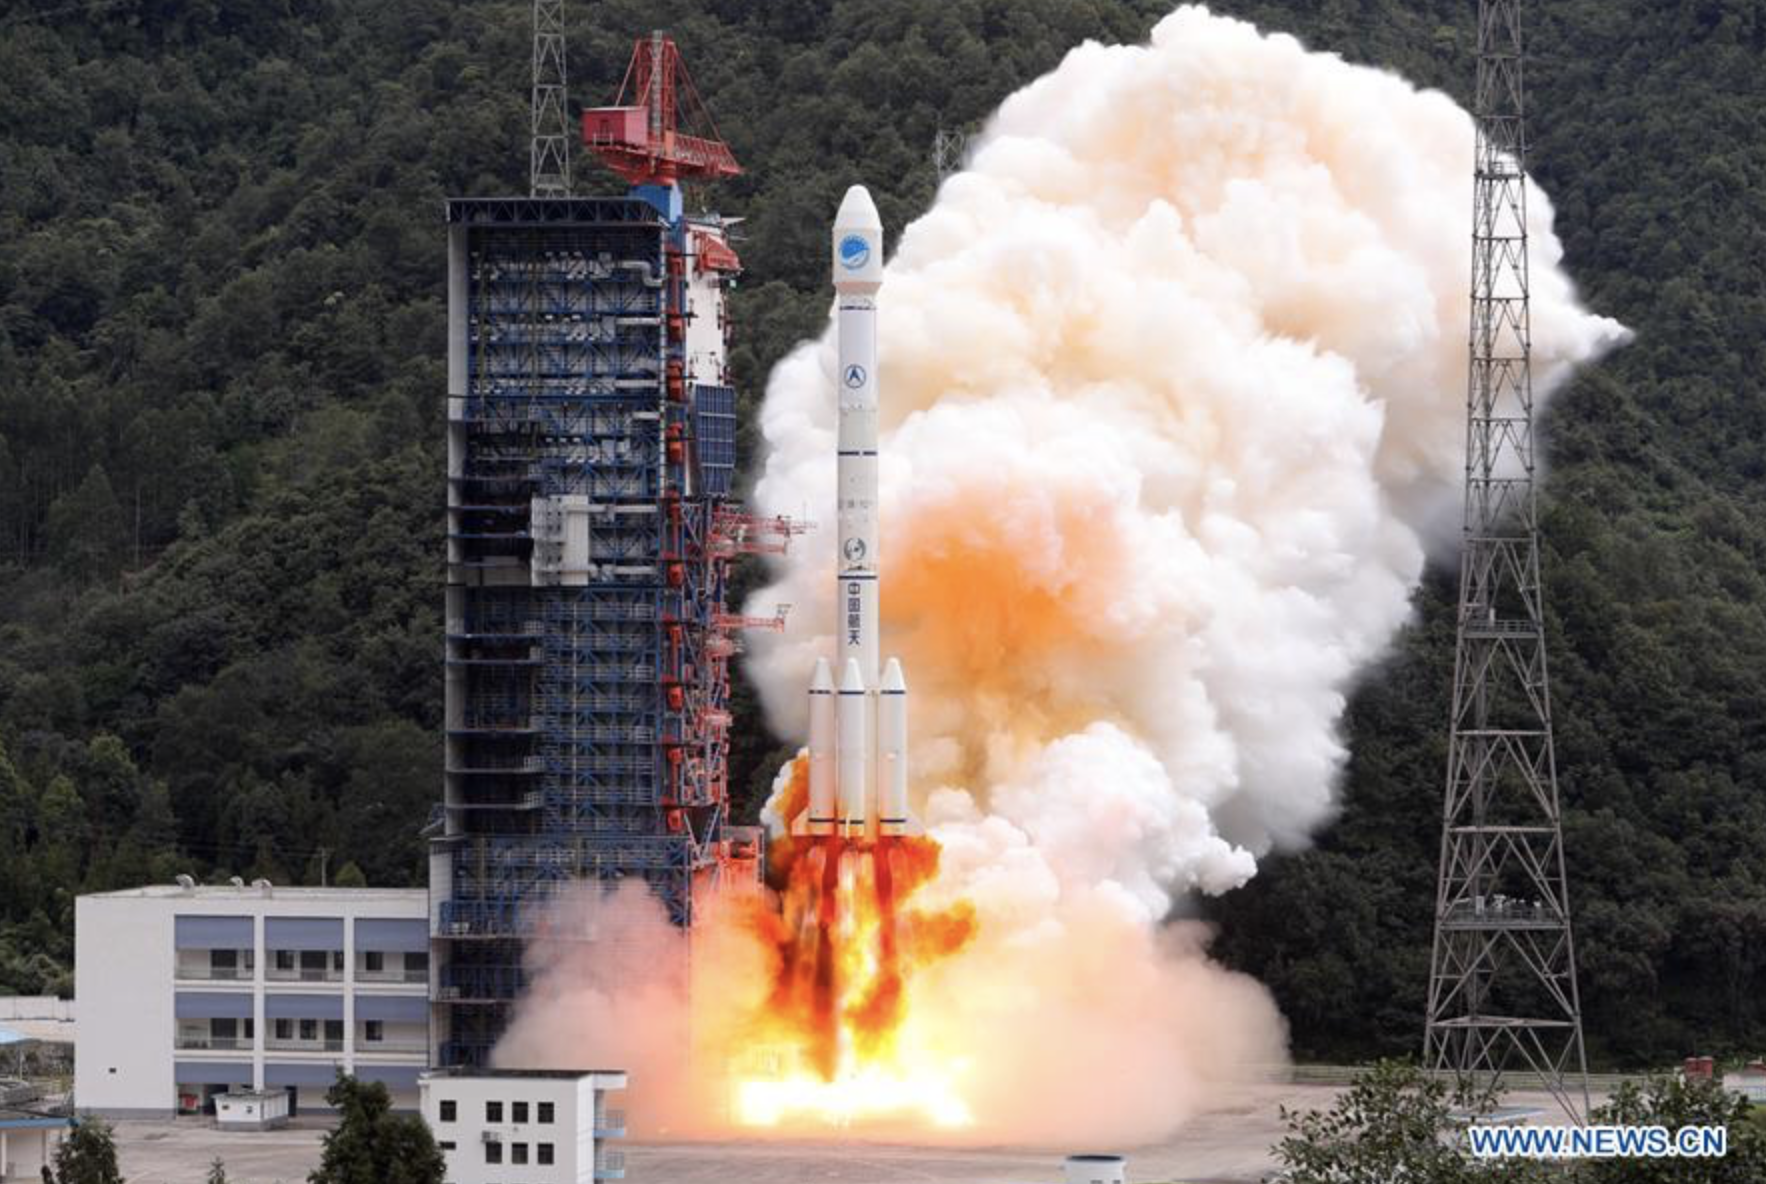 BeiDou’s Progress Continues with China’s Latest Launch of Twin BeiDou-3 Satellites